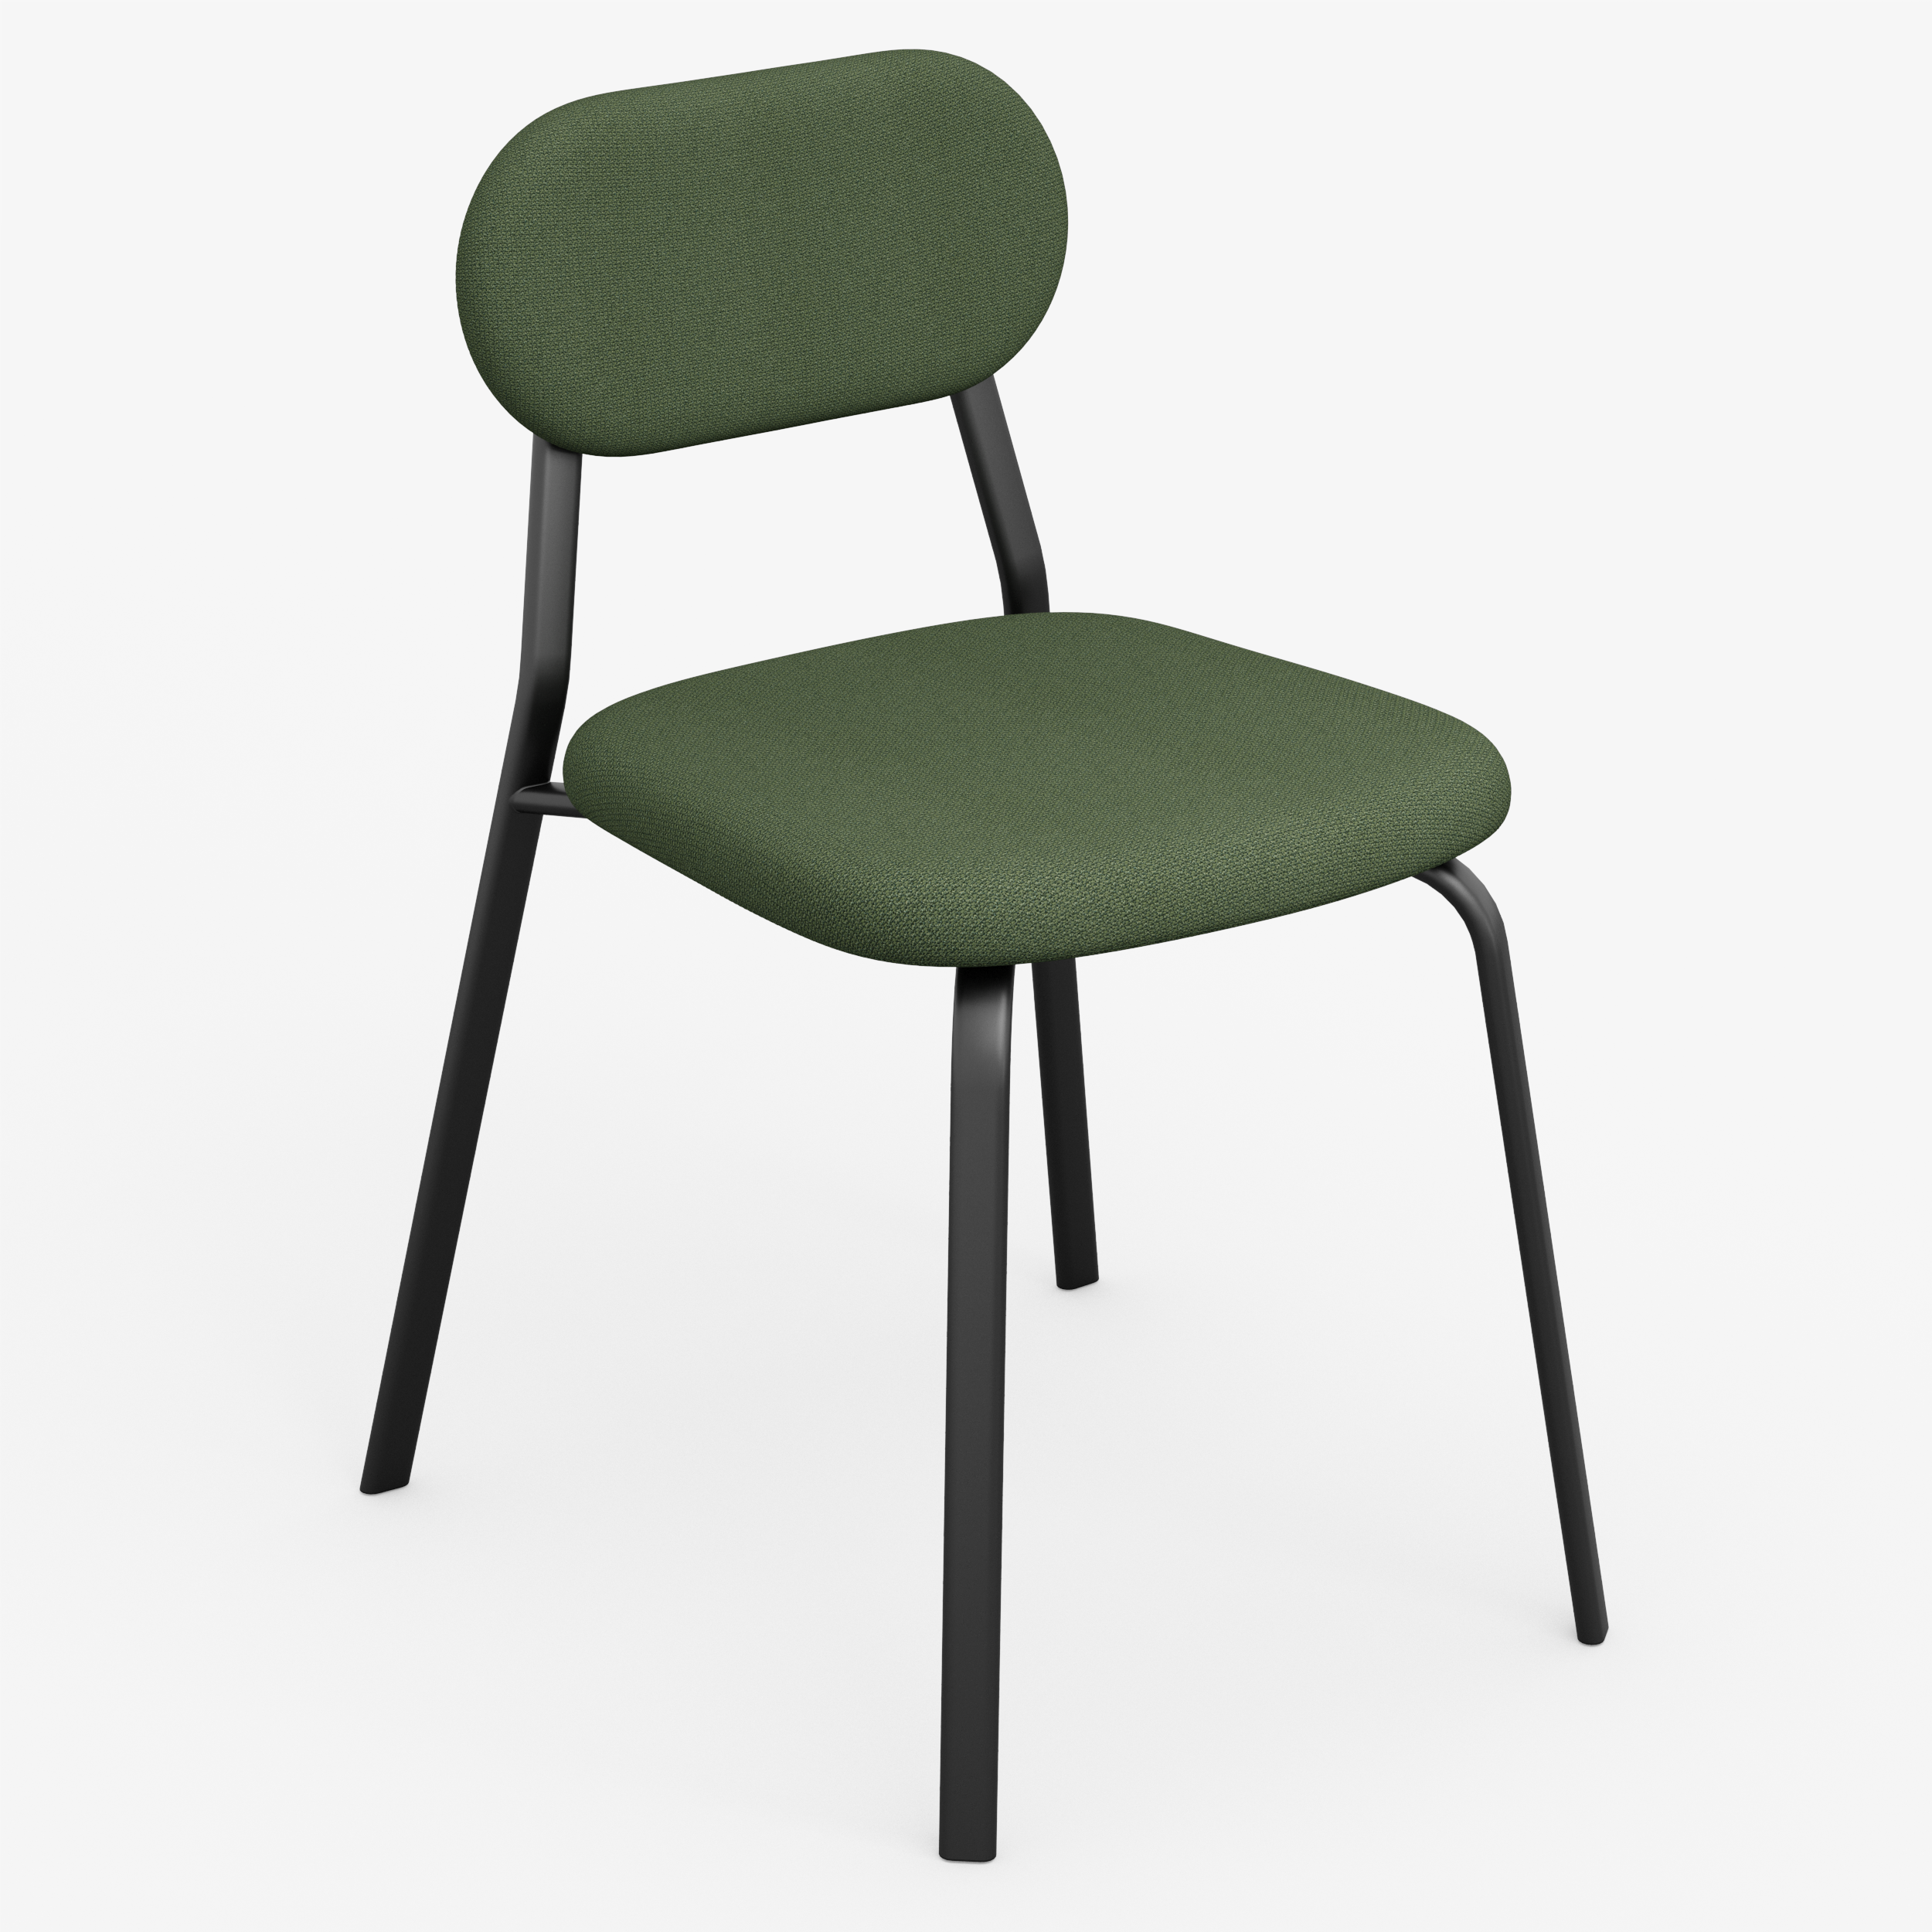 Form - Chair (Oval, Moss Green)